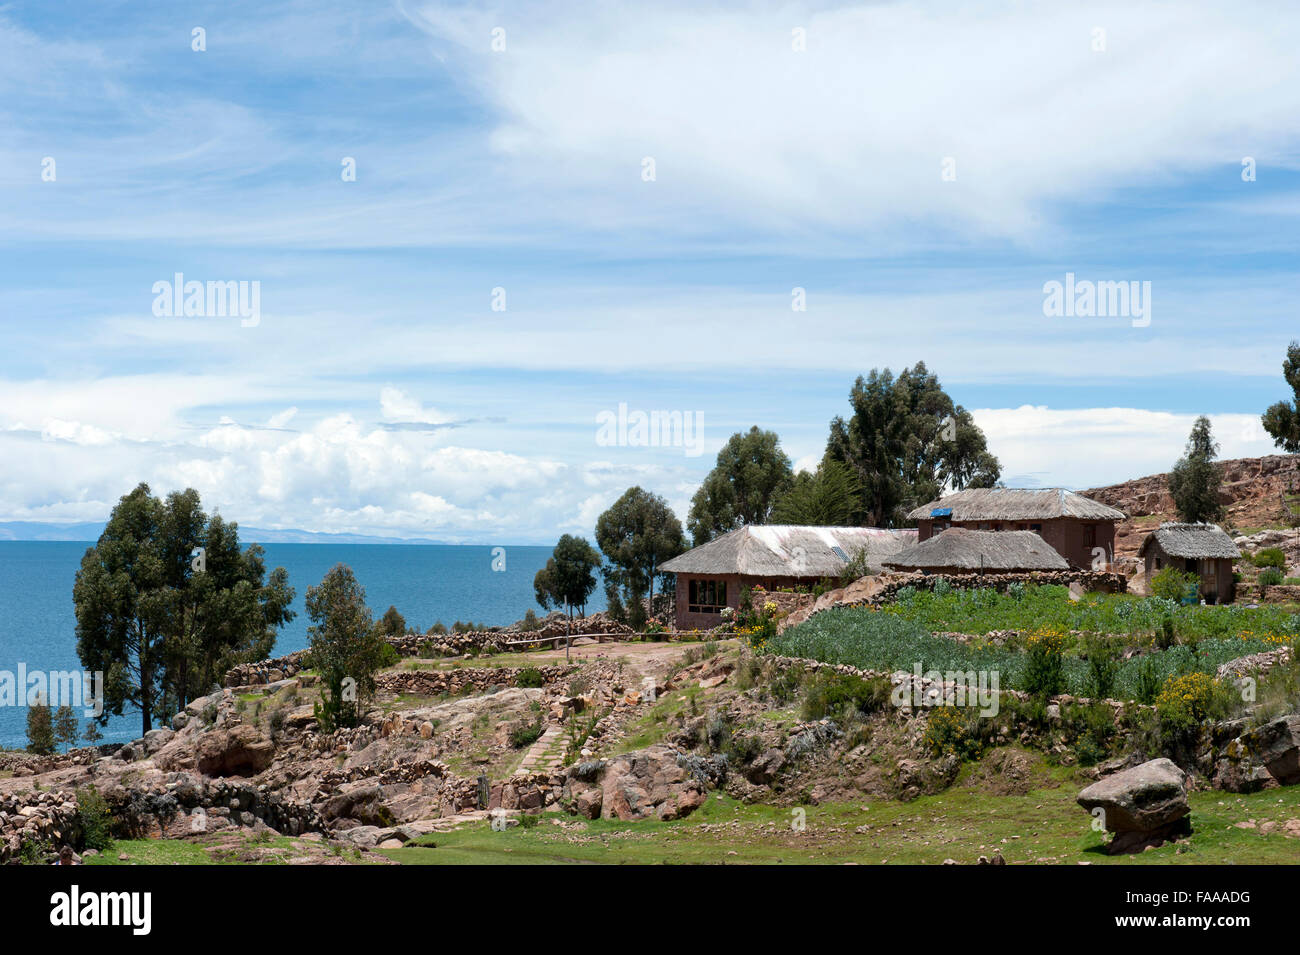 View of Bolivia from Taquile island on a sunny day Stock Photo